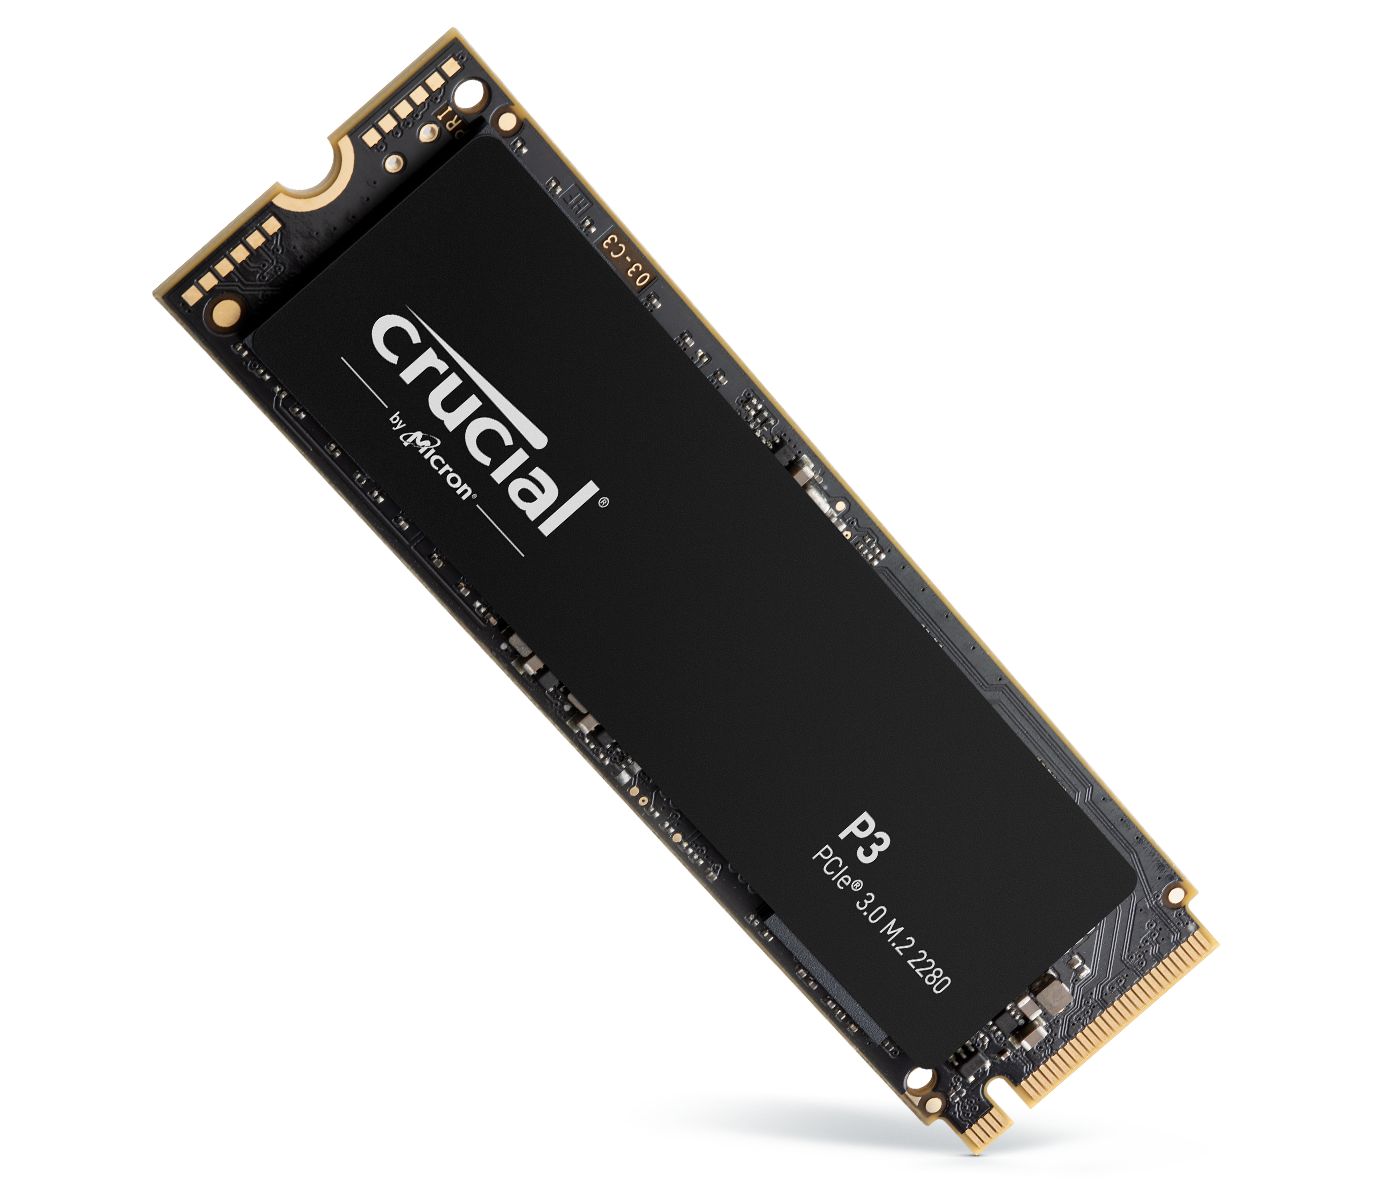 Crucial P5 Plus SSD standing up with shadow